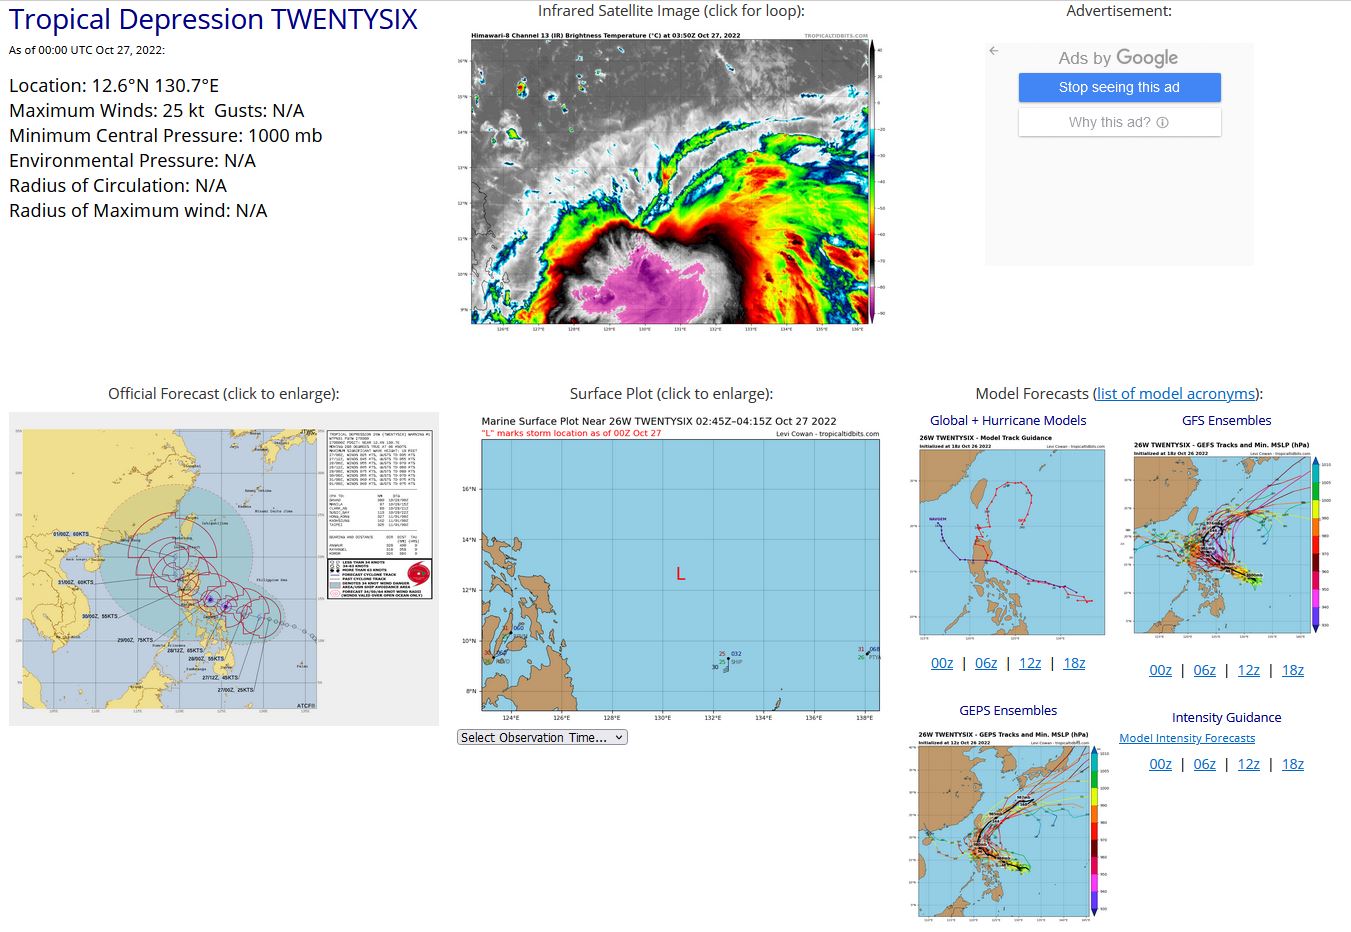 SATELLITE ANALYSIS, INITIAL POSITION AND INTENSITY DISCUSSION: ANIMATED MULTISPECTRAL SATELLITE IMAGERY (MSI) SHOWS A SYSTEM IN THE PHILIPPINE SEA THAT IS DISORGANIZED BUT SLOWLY CONSOLIDATING WITH FLARING CENTRAL CONVECTION AND FORMATIVE AND FRAGMENTED RAIN BANDS EXTENDING OUT TO APPROXIMATELY 230 NM NE-SW. THE NORTHWEST PERIPHERIES EXPOSE A SMALL PORTION OF THE LOW LEVEL CIRCULATION (LLC) AND ALSO SHOWS A STEADY STREAM OF STRATOCUMULUS LINES  ASSOCIATED WITH THE COLD NORTHEAST SURGE. RECENT SCATTEROMETRY DATA  INDICATES THE LOW-LEVEL CIRCULATION IS WEAK AND ELONGATED WITH THE  STRONGER WINDS MORE THAN 60NM TO THE EAST. THE INITIAL POSITION IS  PLACED WITH MEDIUM CONFIDENCE BASED ON A LARGE AND RAGGED BUT DEFINED  LLC FEATURE IN THE 2213Z SSMIS MICROWAVE IMAGE. THE INITIAL INTENSITY IS EXTRAPOLATED FROM RECENT SCATTEROMETRY DATA AND REFLECTS THE SUSTAINED 6-HR WEAK SIGNATURE IN THE ANIMATED ENHANCED INFRARED SATELLITE IMAGERY.